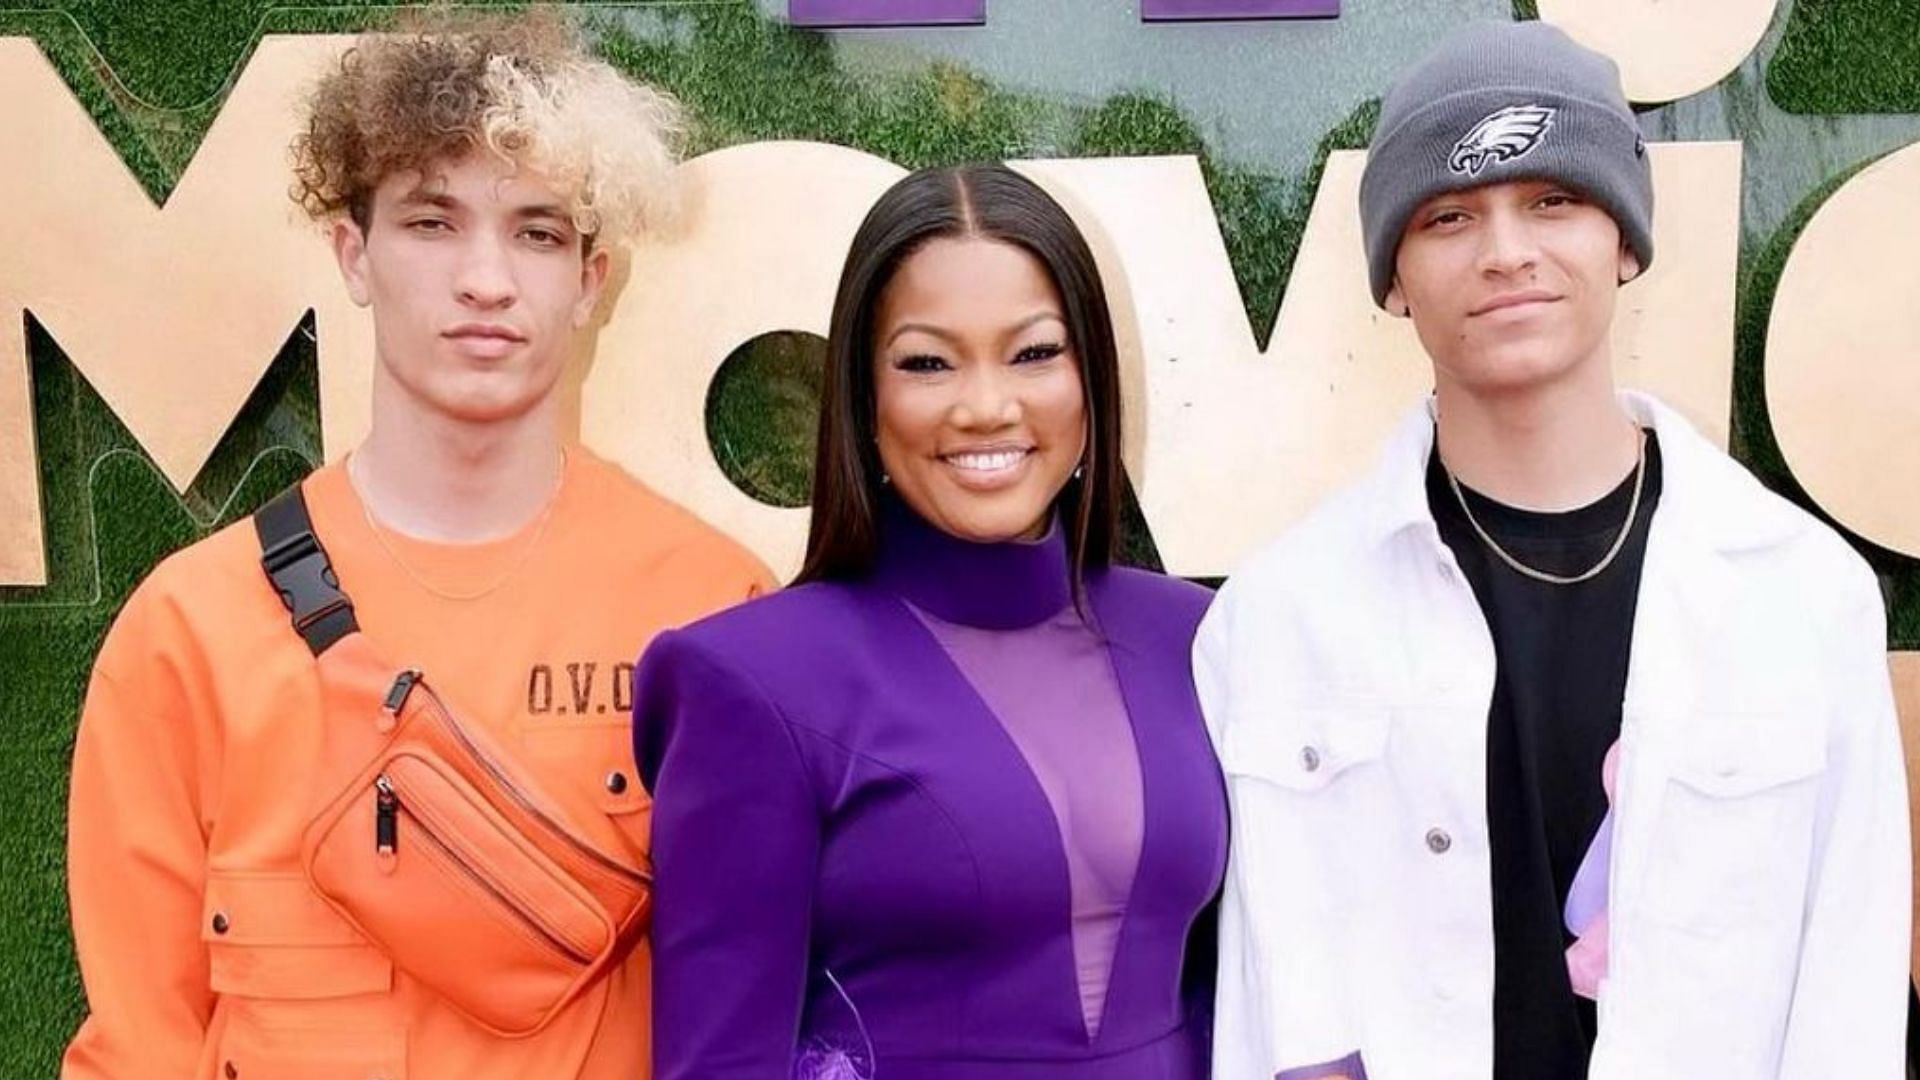 Fans slam haters for cyberbullying RHOBH Garcelle Beauvais&rsquo; son Jax (Image via garcelle/Instagram)